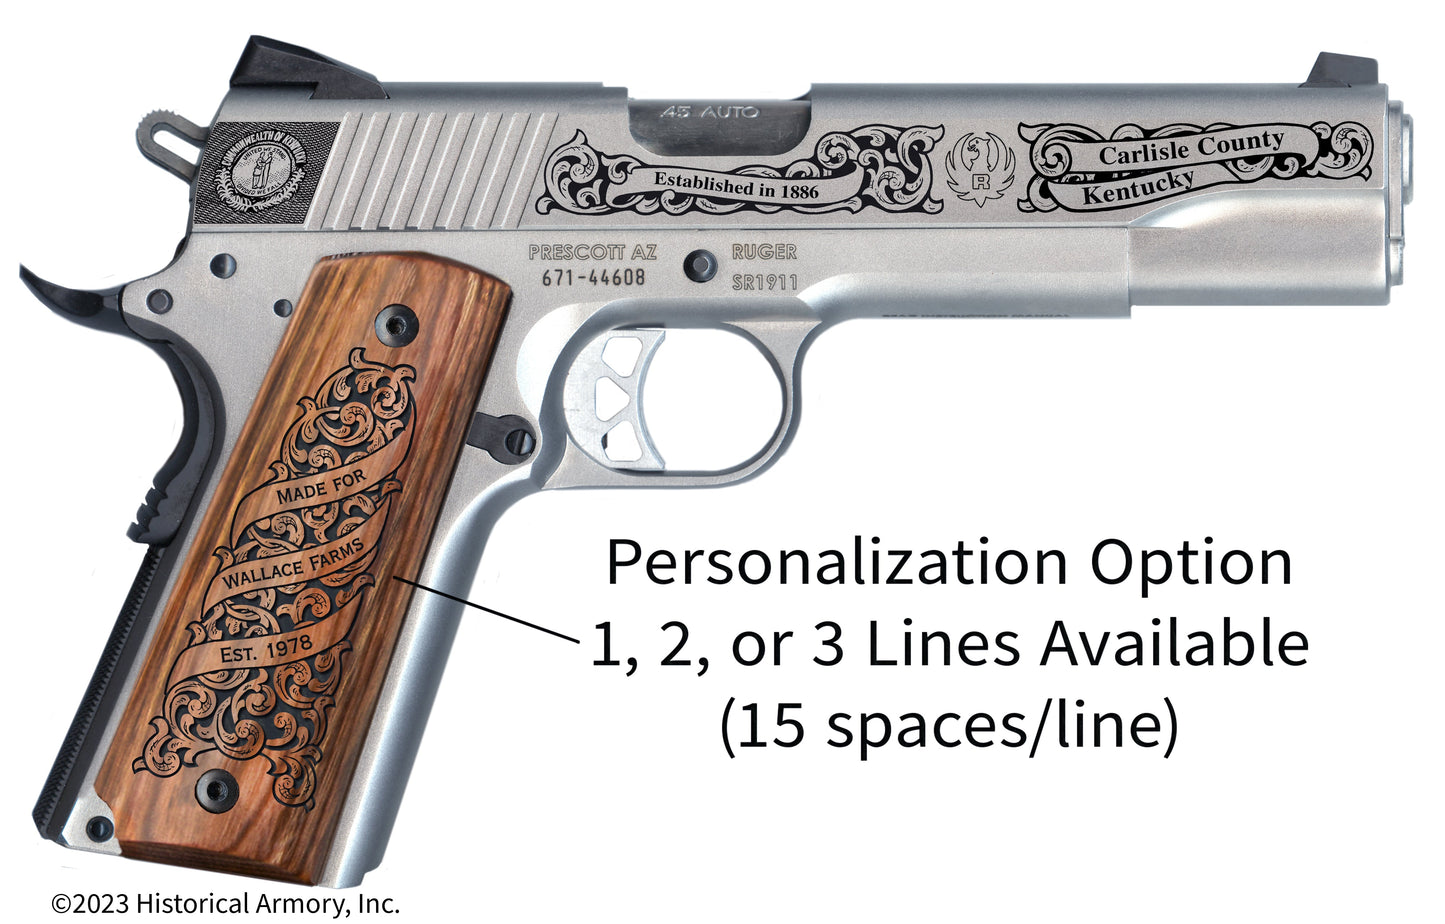 Carlisle County Kentucky Personalized Engraved .45 Auto Ruger 1911